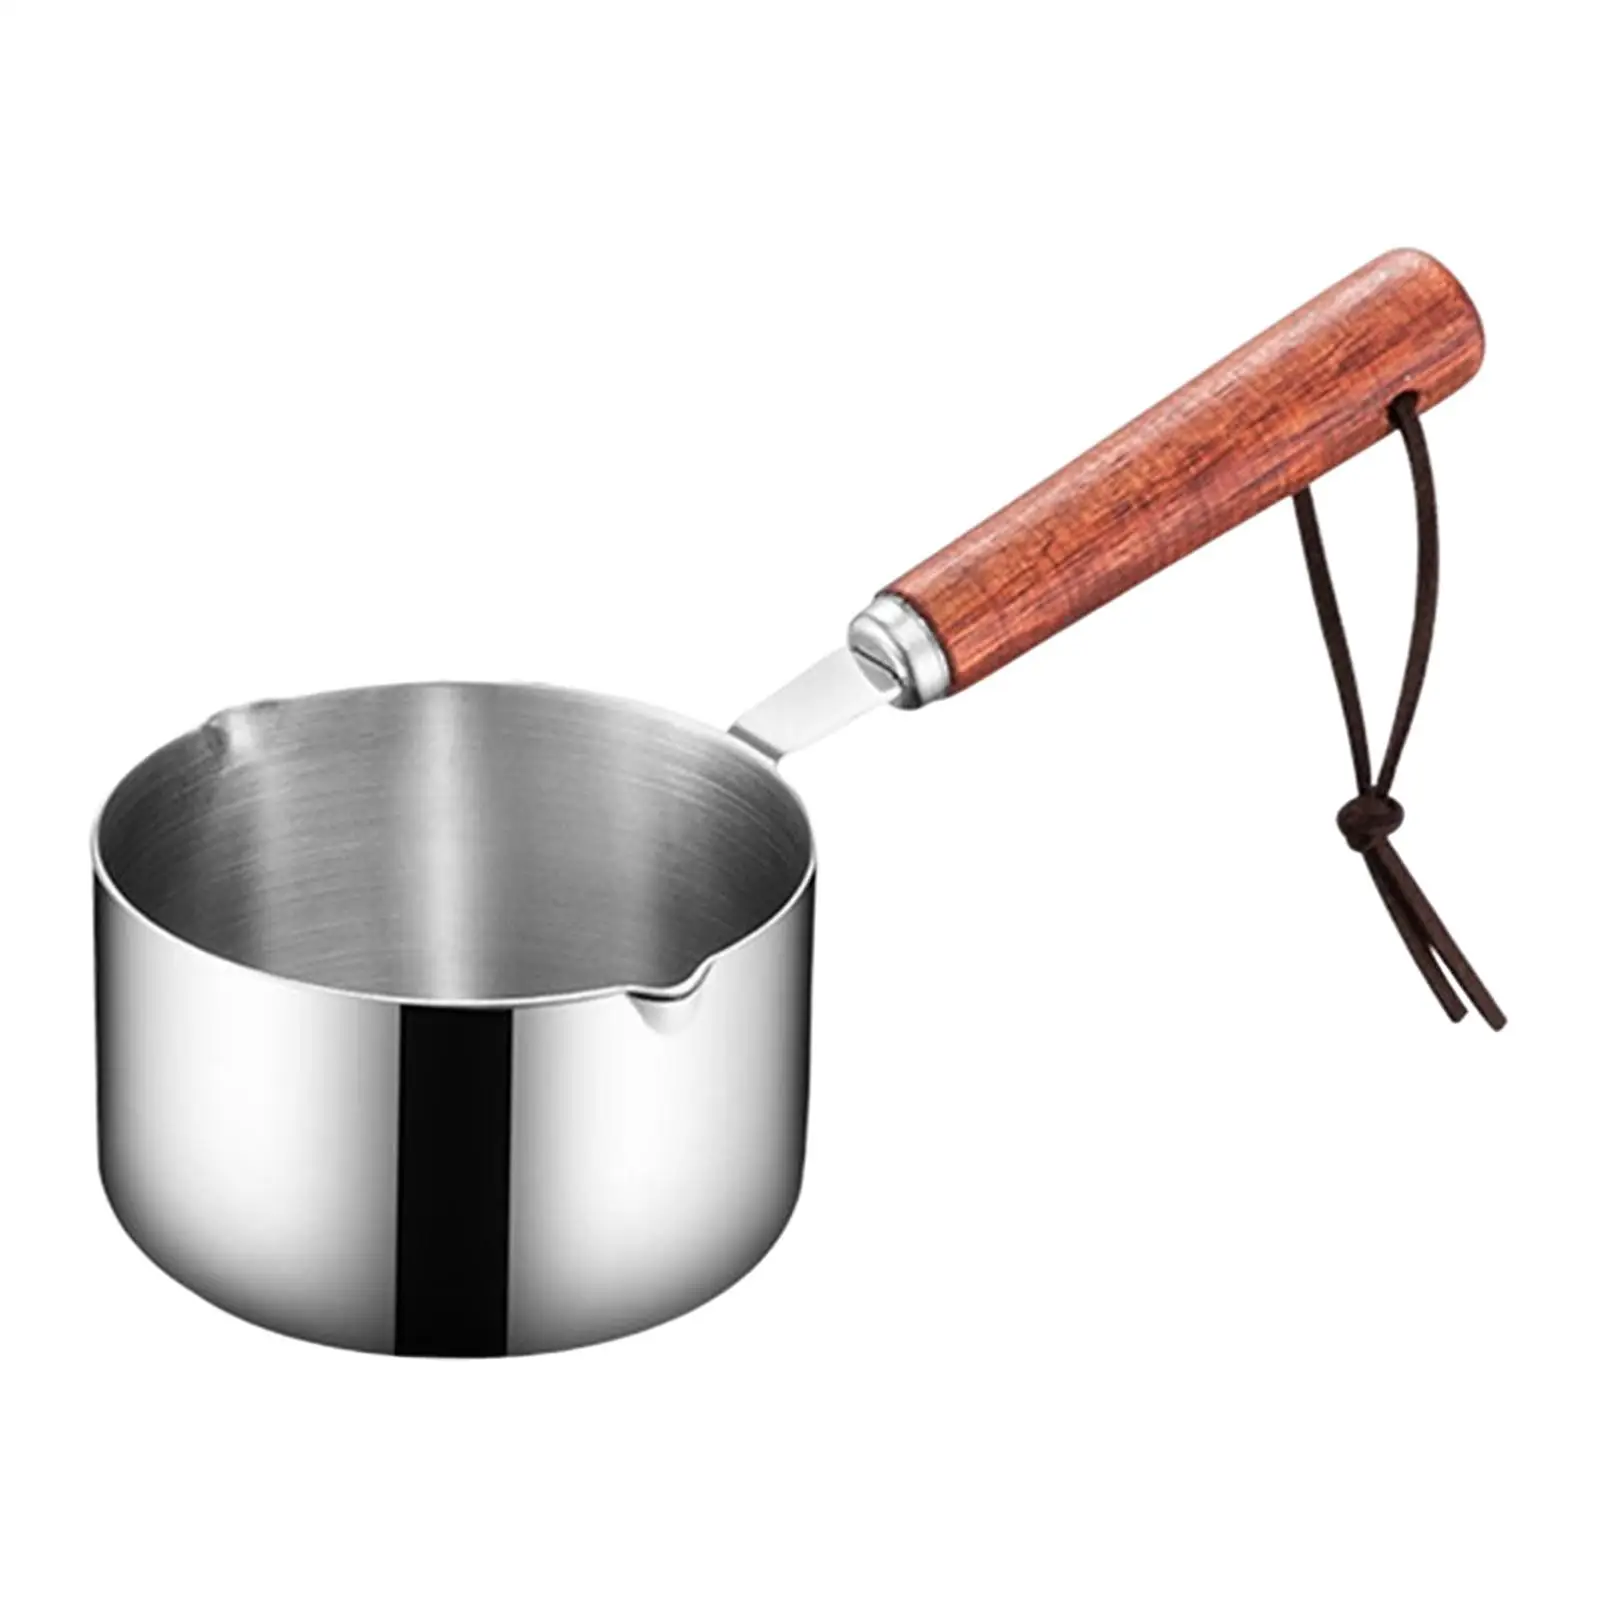 Mini Soup Pot Easy to Clean Small Cookware Milk Pan with Wooden Handle Seasoning Bowl Small Saucepan for Reheating Soup Stovetop